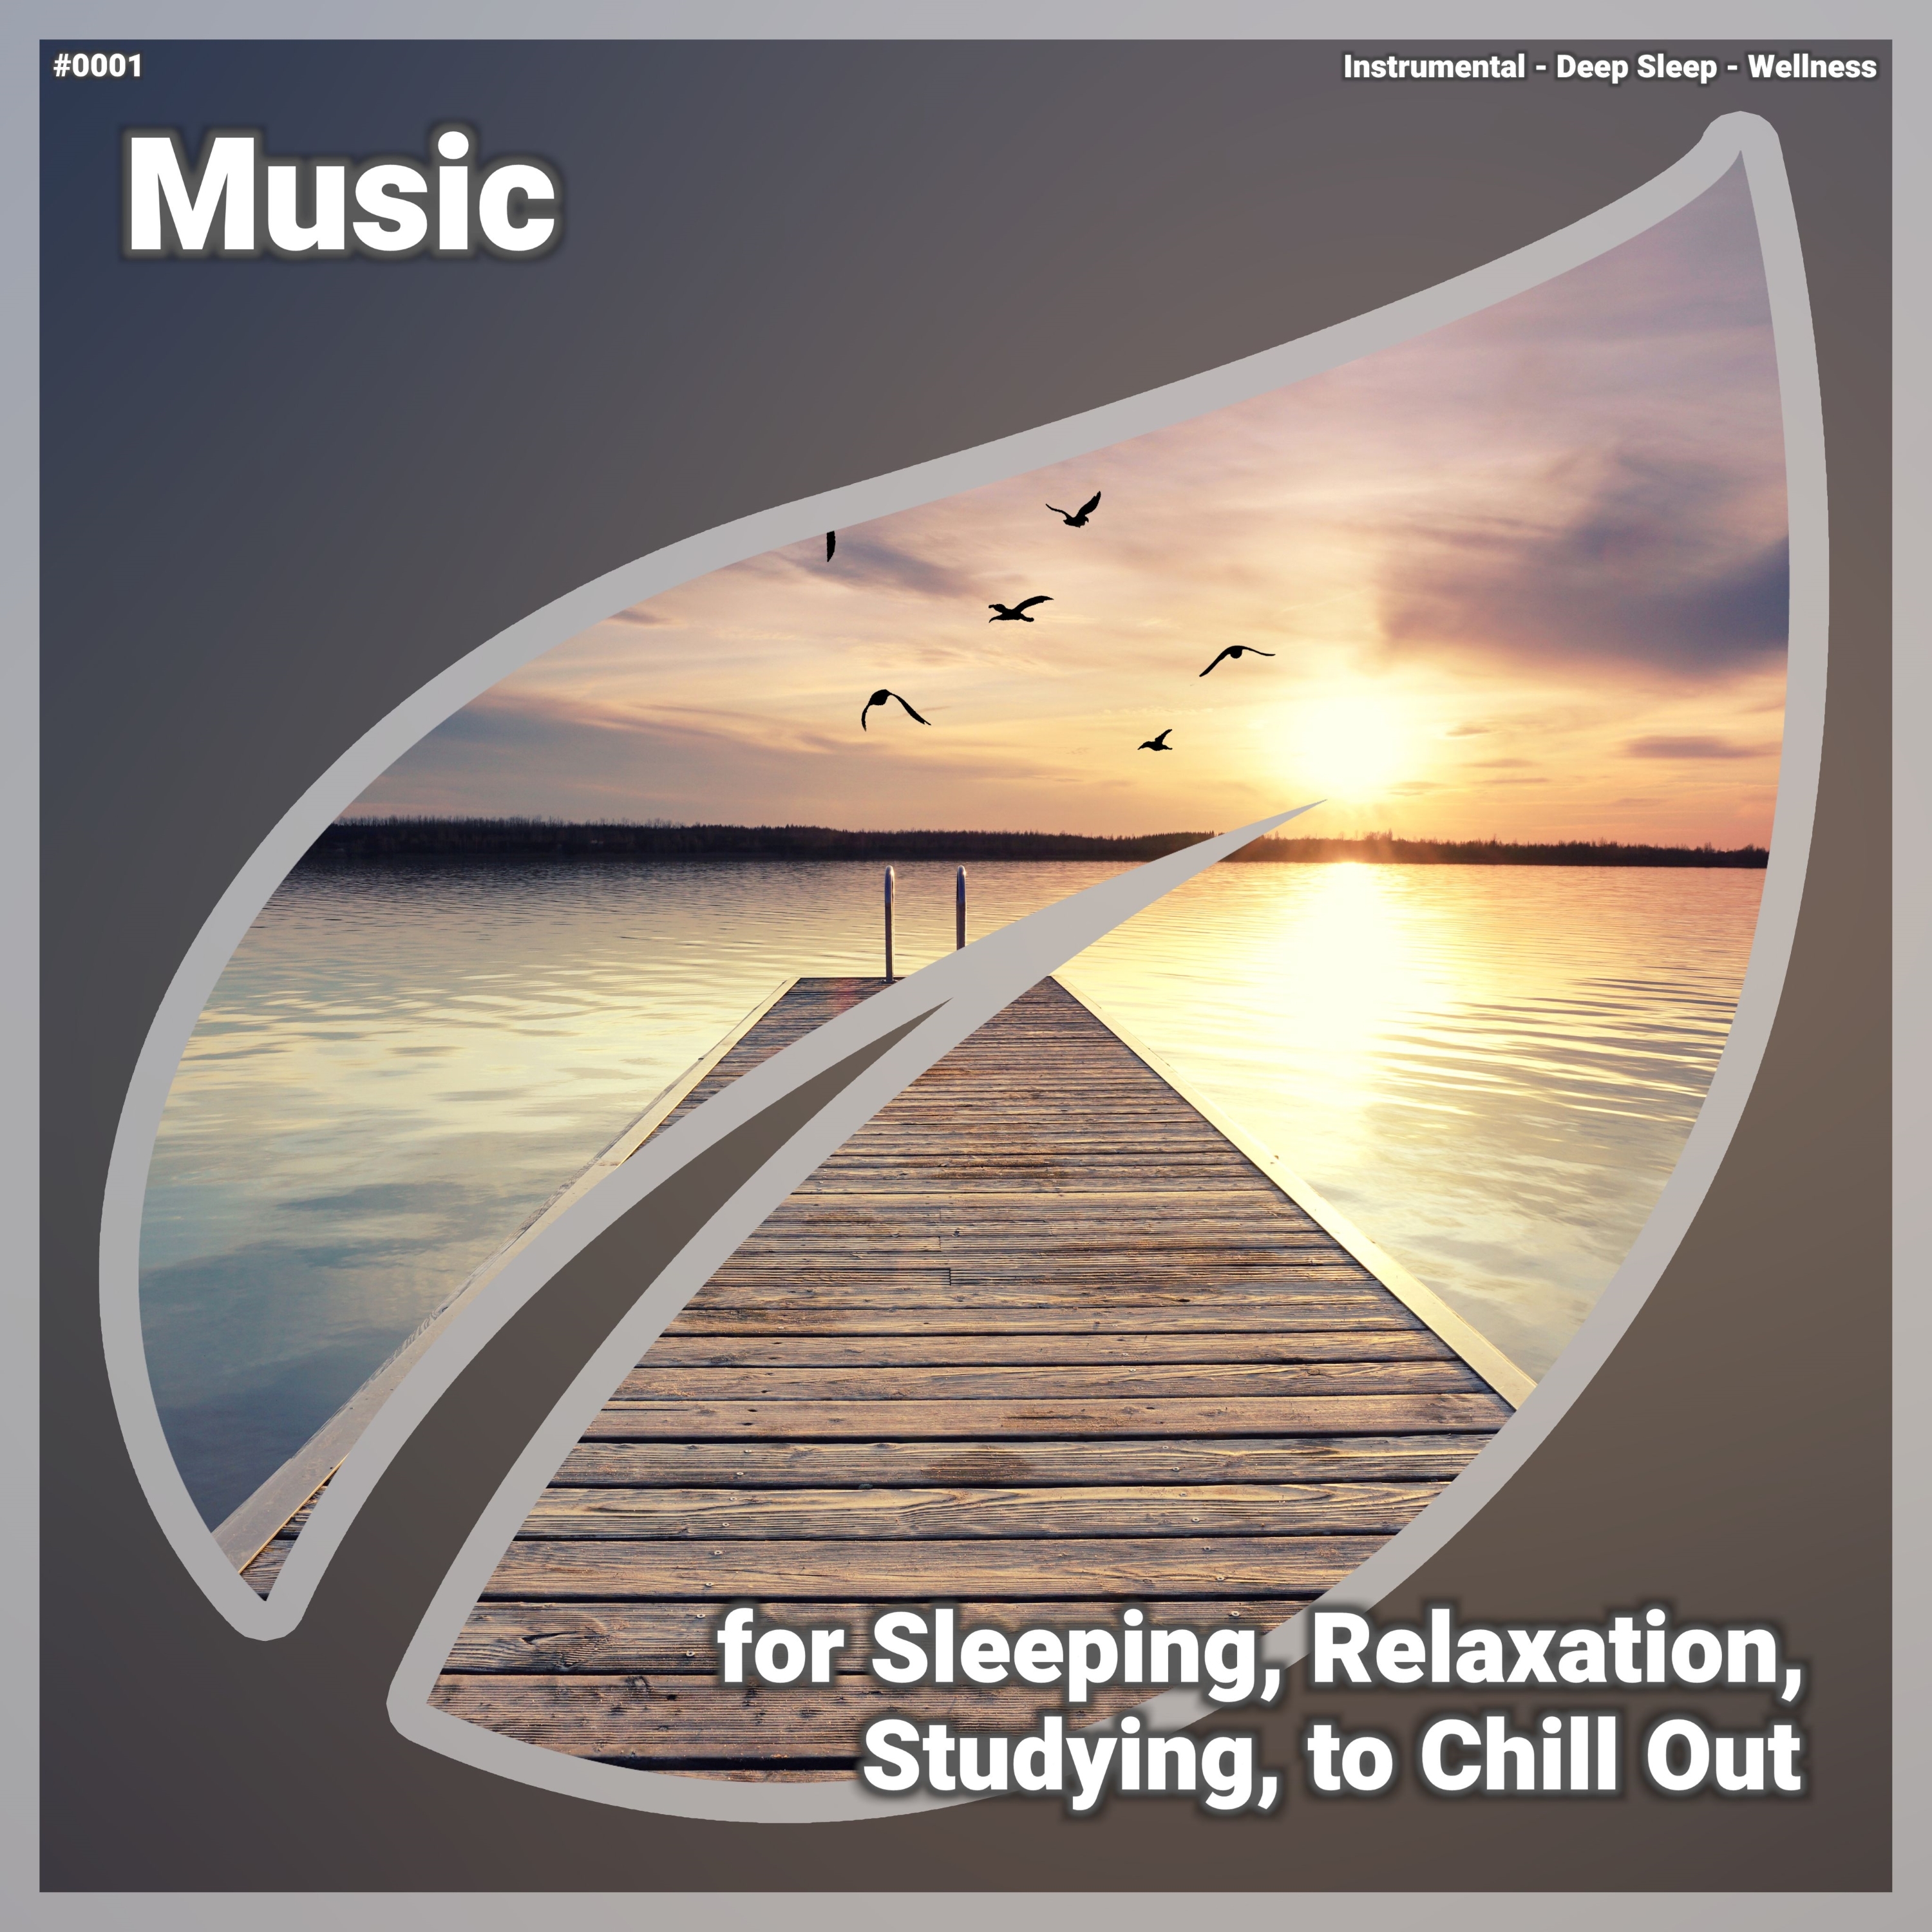 I-download Relaxing Music, Pt. 56